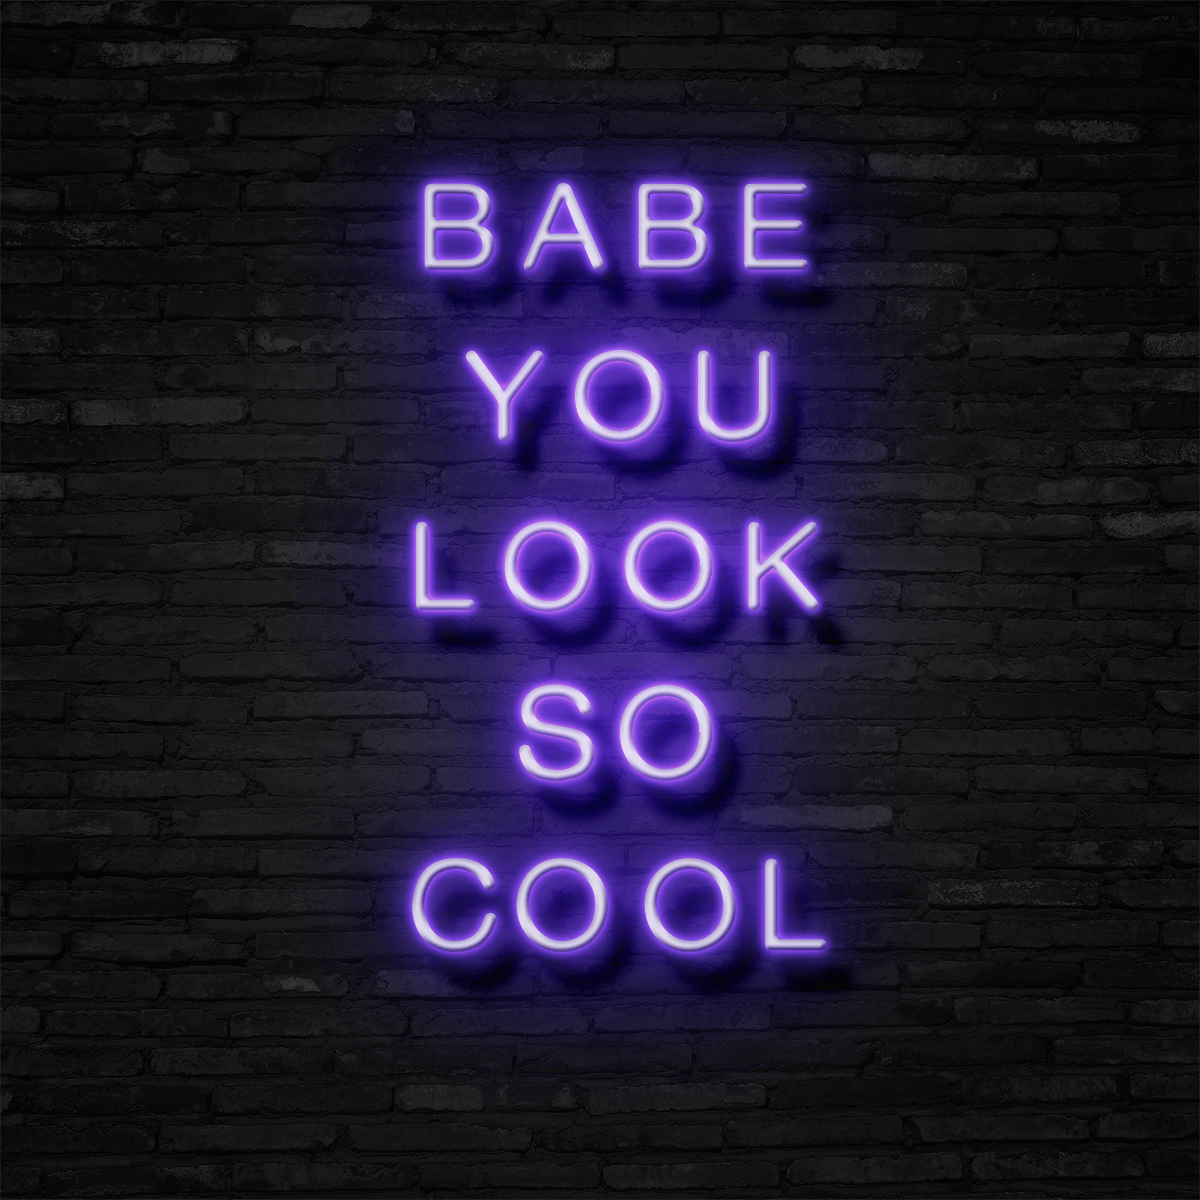 BABE YOU LOOK SO COOL - Neon Sign